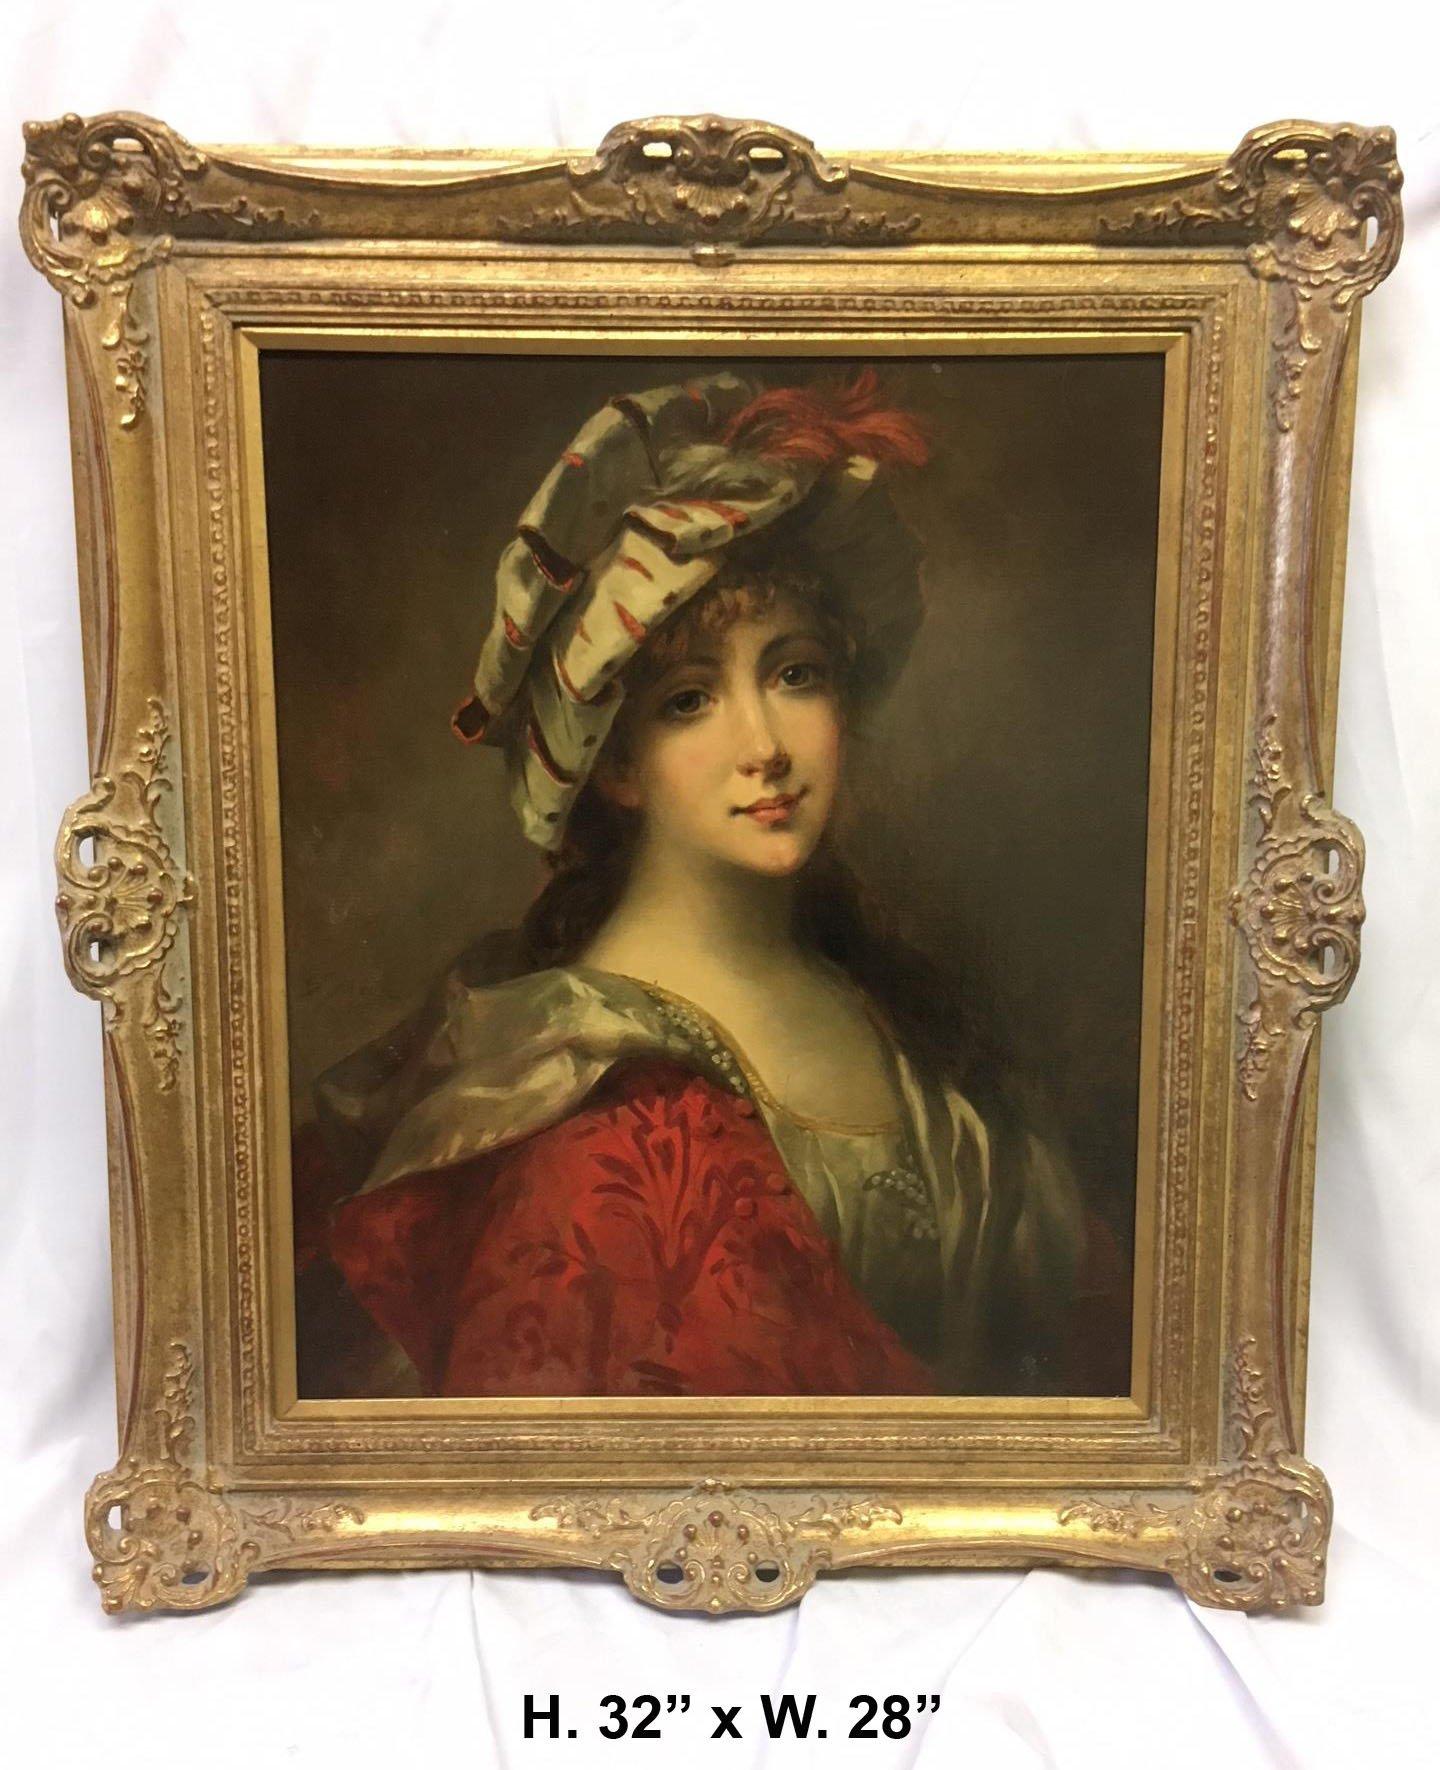 Lovely French oil on canvas portrait painting of an aesthetically pleasing smiling lady wearing traditional clothing. 
Late 19th-early 20th century
Signed by Salvadore Mege (French/Canadian; 1854).
Meticulous attention was given to the details of